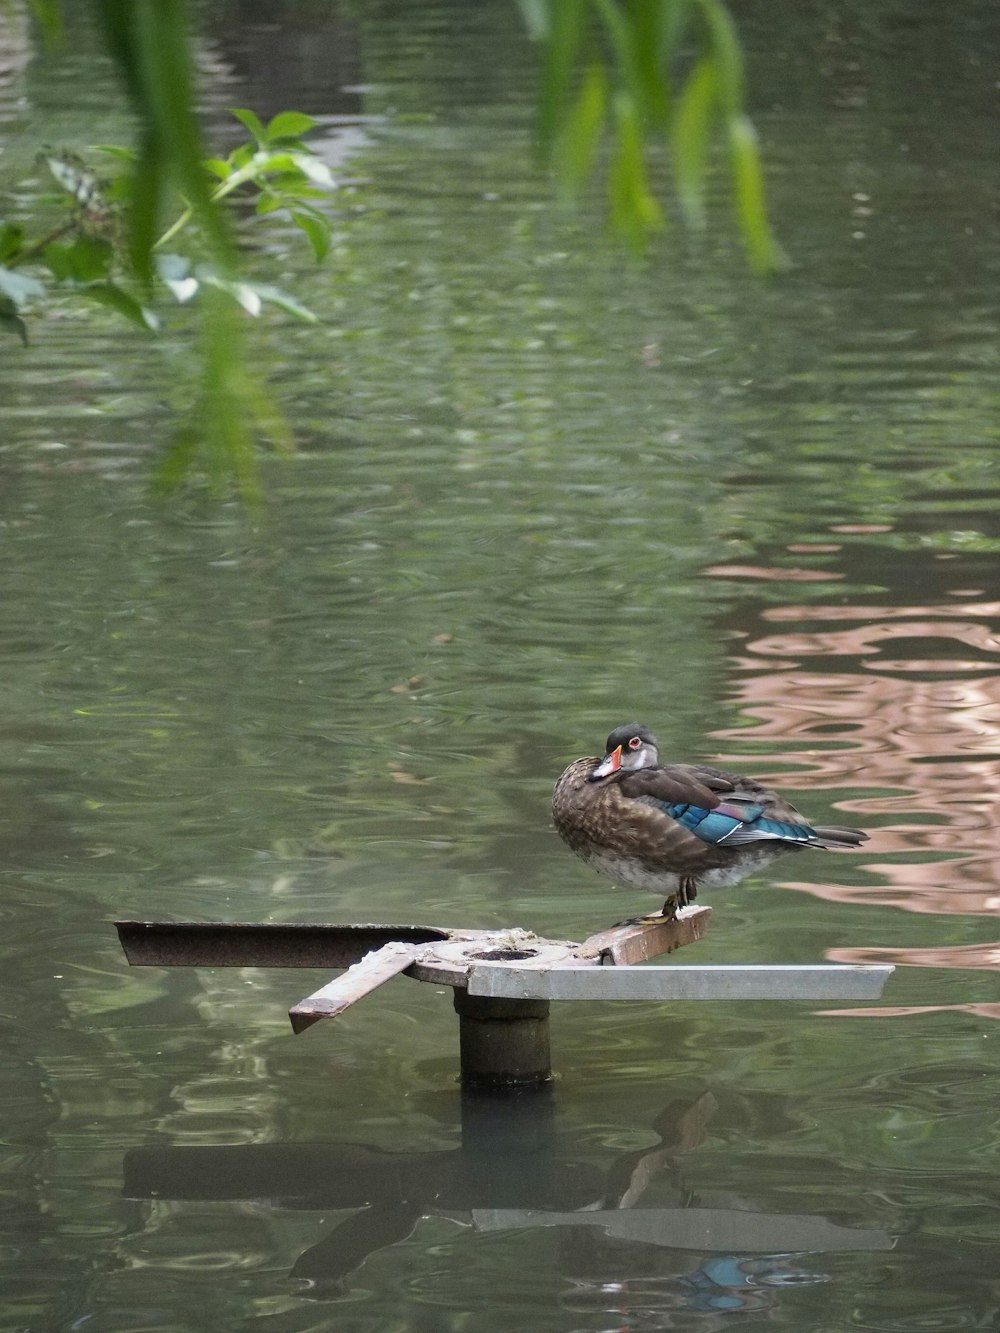 a bird sitting on a pole in a body of water